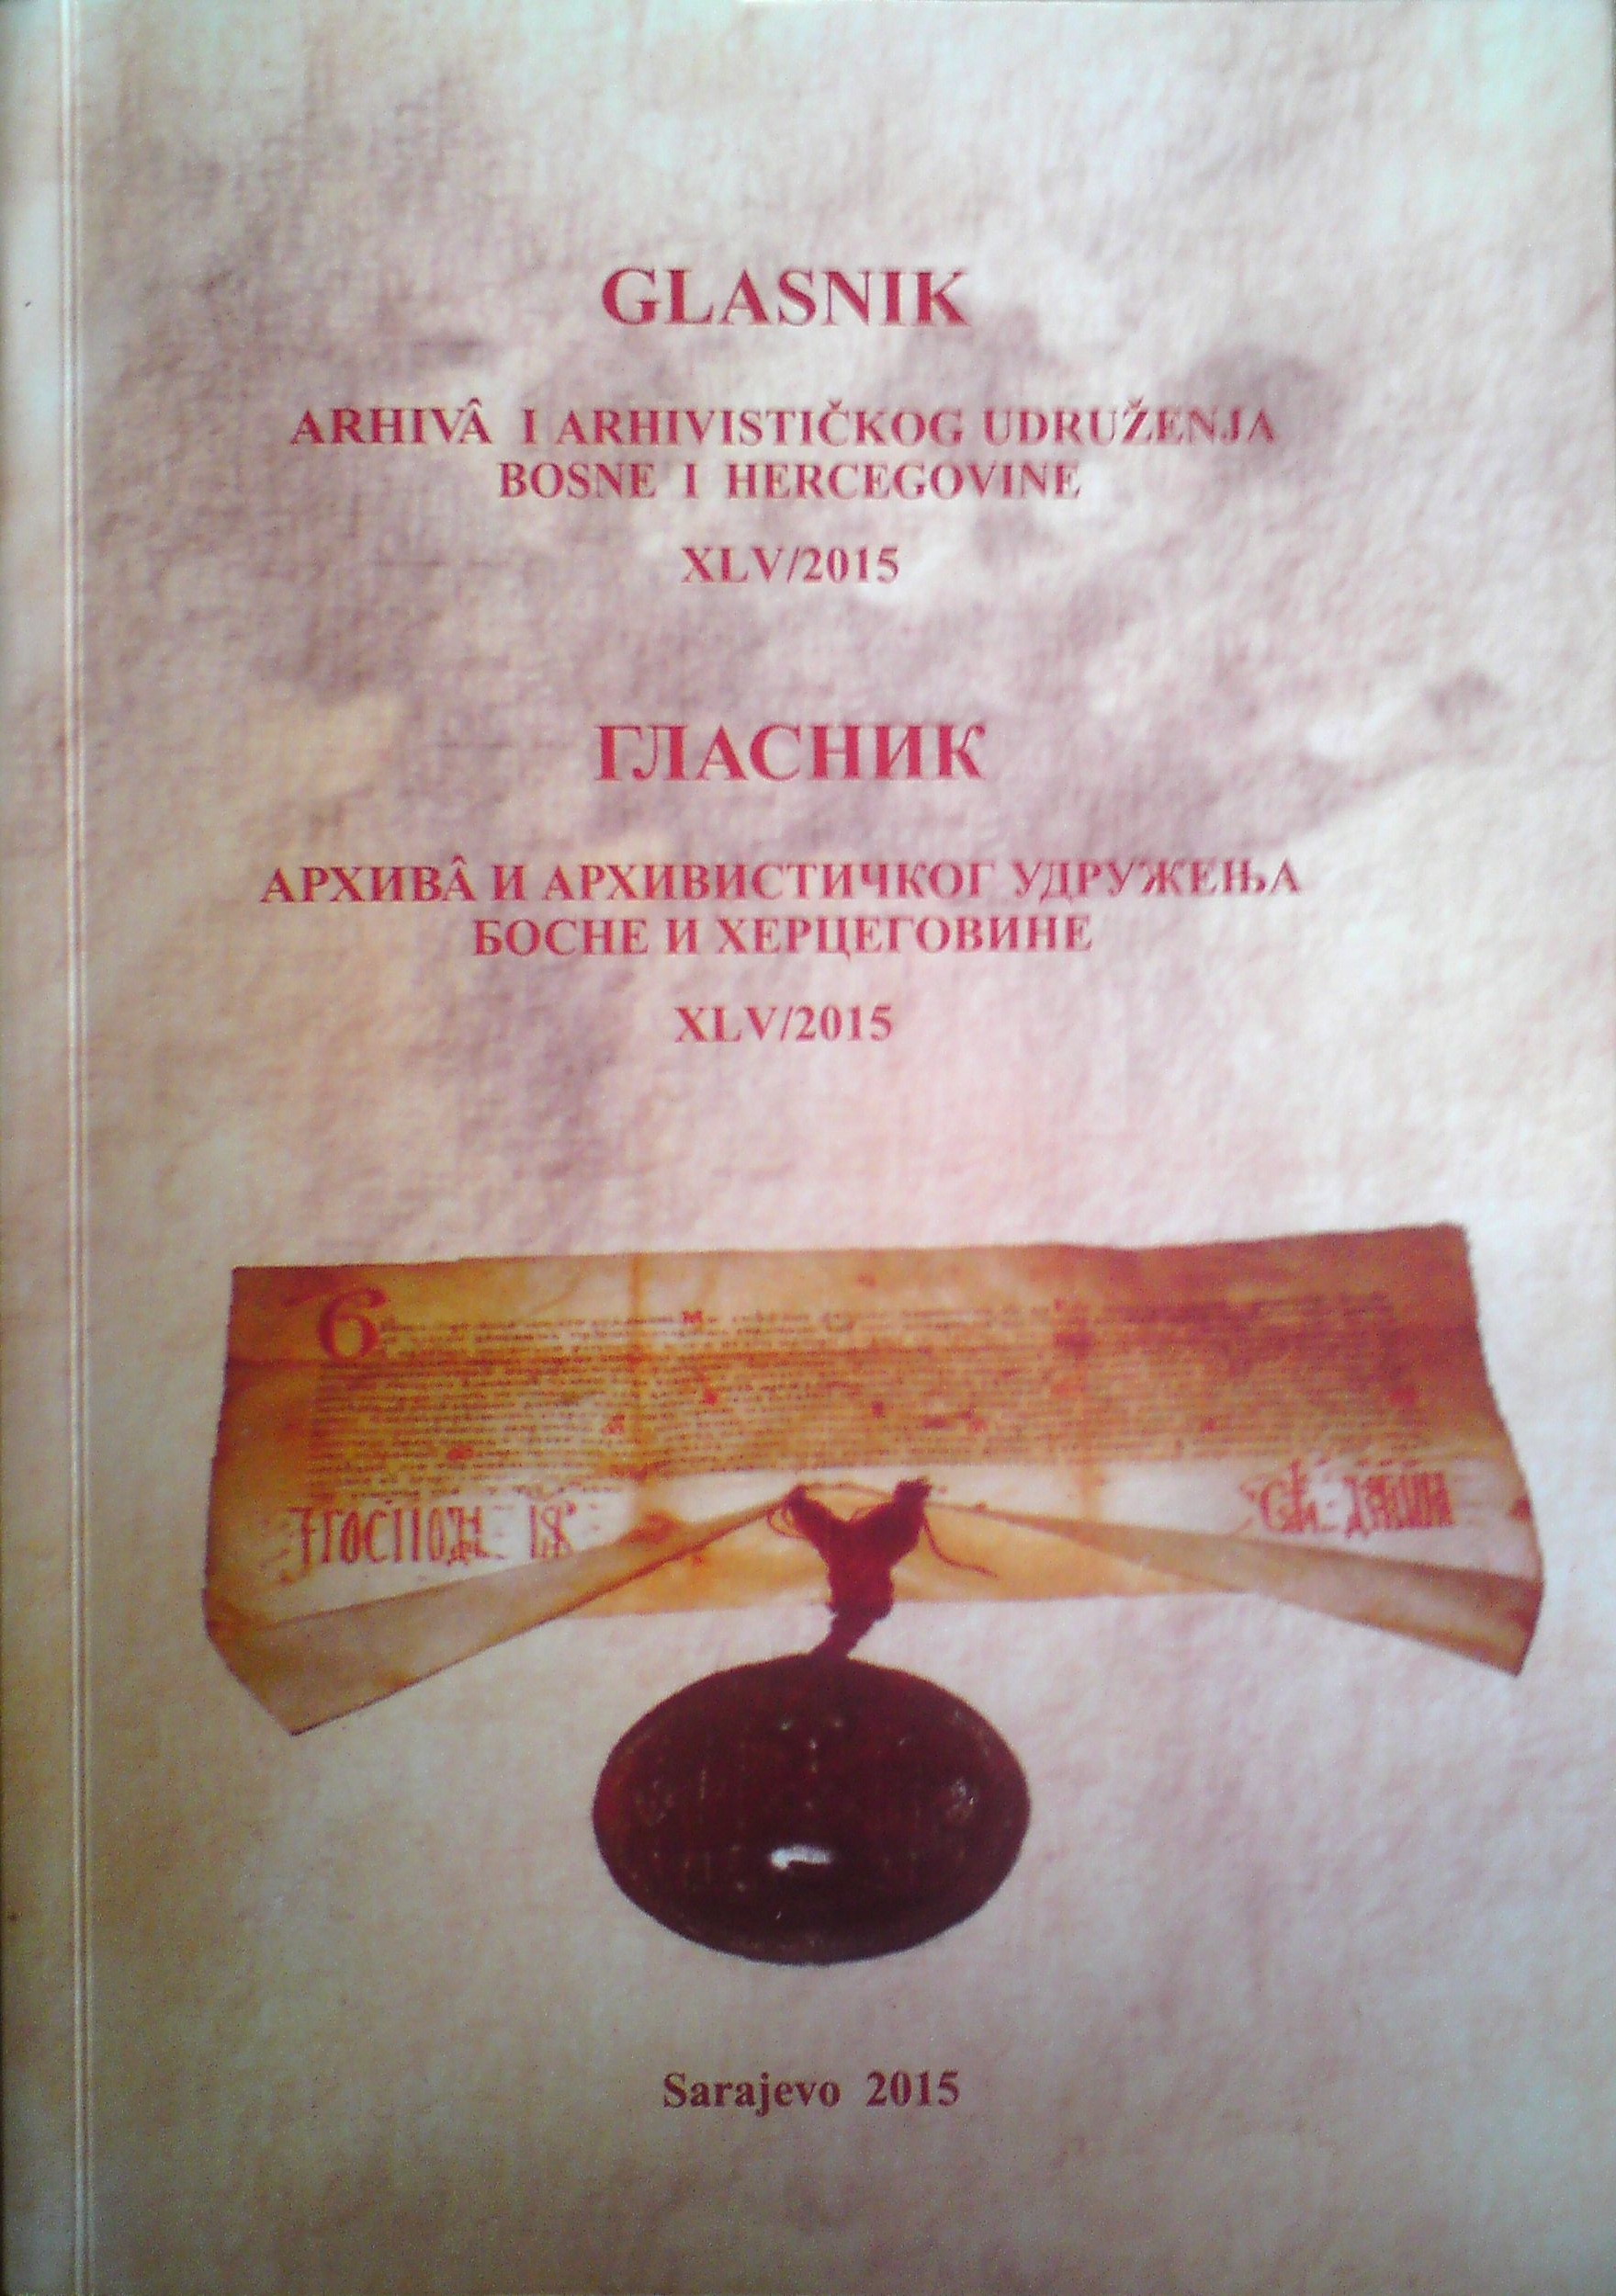 THE ARCHIVAL MATERIAL IN THE MAKING ON THE EXAMPLE OF THE BOSNIA AND HERZEGOVINA INSTITUTE FOR MISSING PERSONS Cover Image